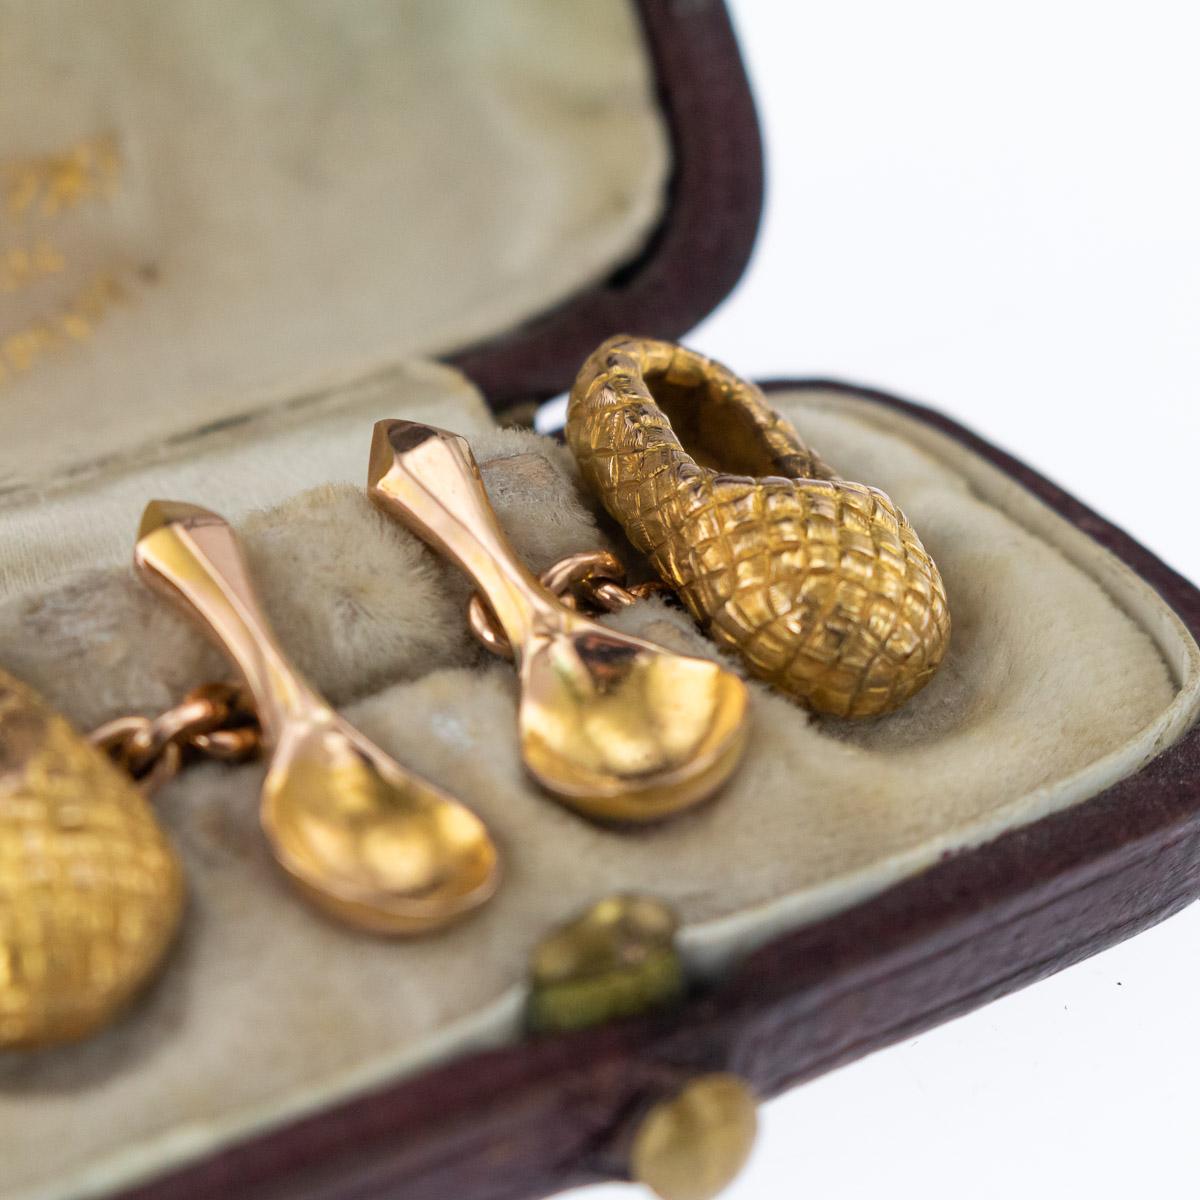 19th Century Russian Faberge 56 Gold Lapti and Spoon Cufflinks V Soloviev 3